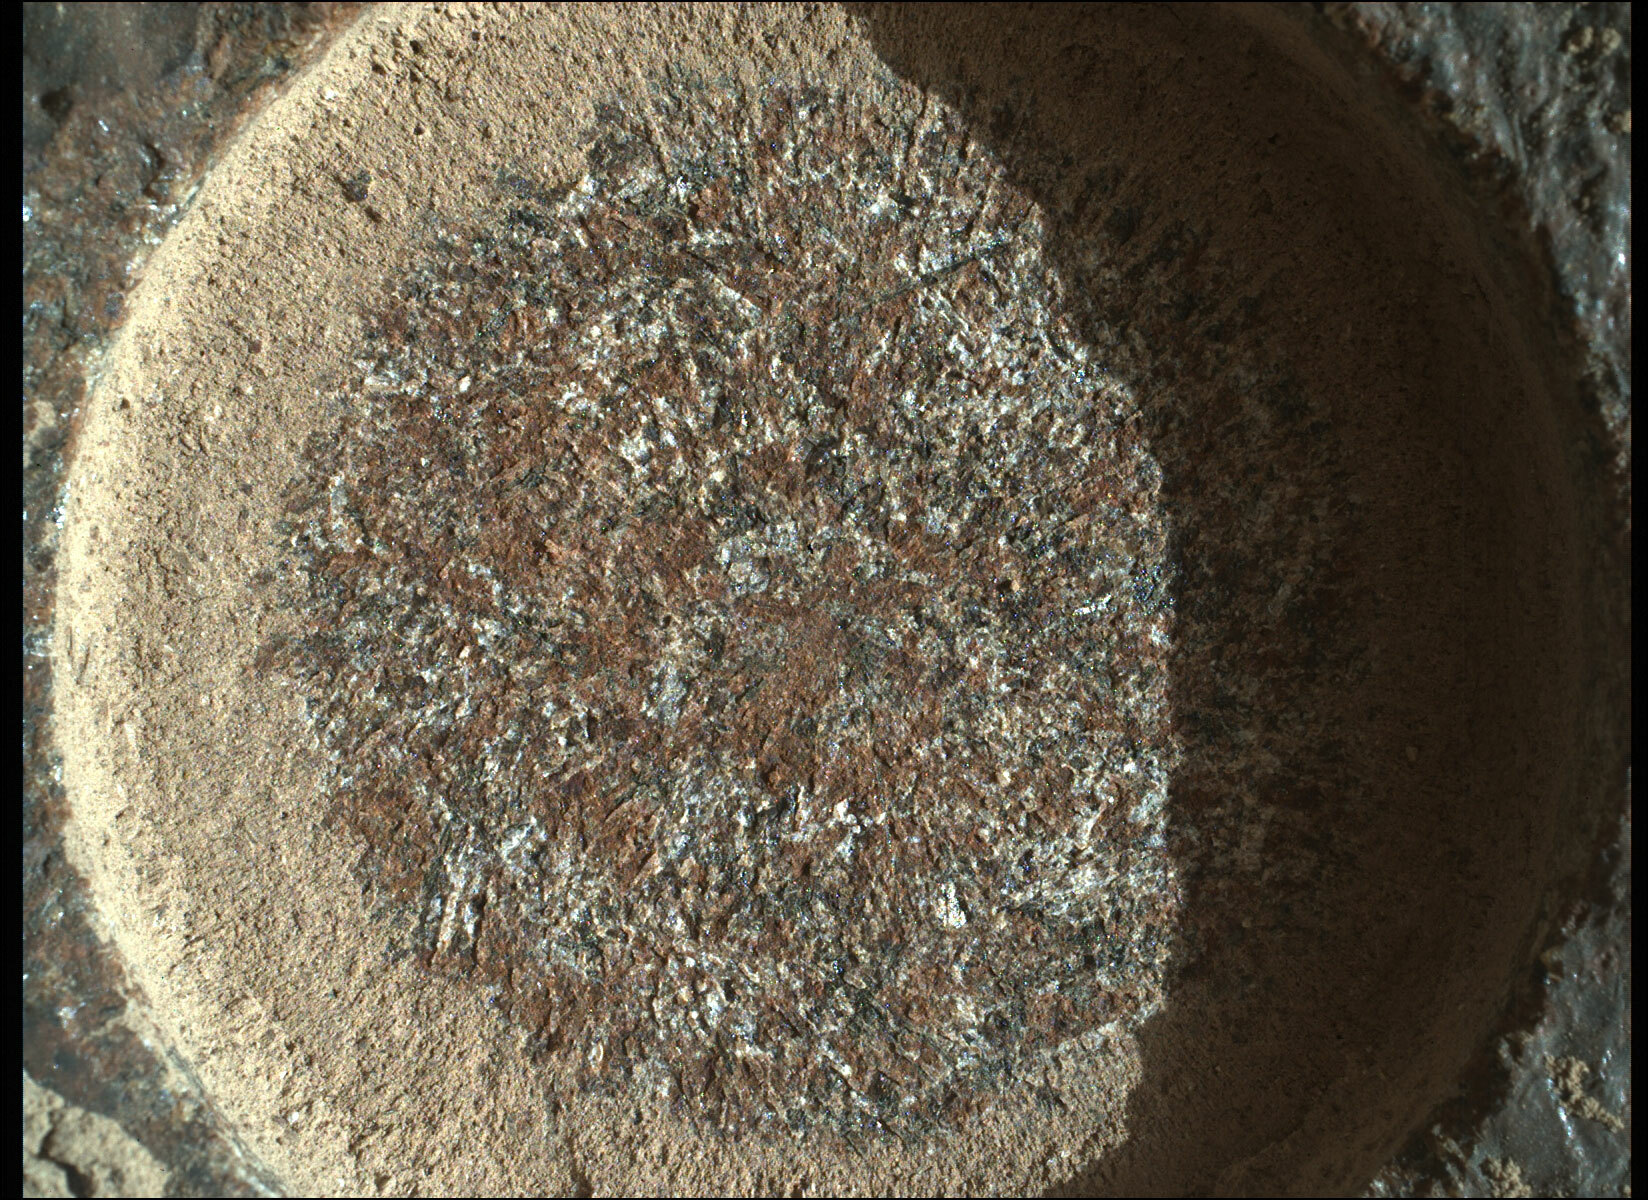 A close-up view of a Mars rock with a particular focus on the circular abrasion pattern created by NASA's Perseverance rover.